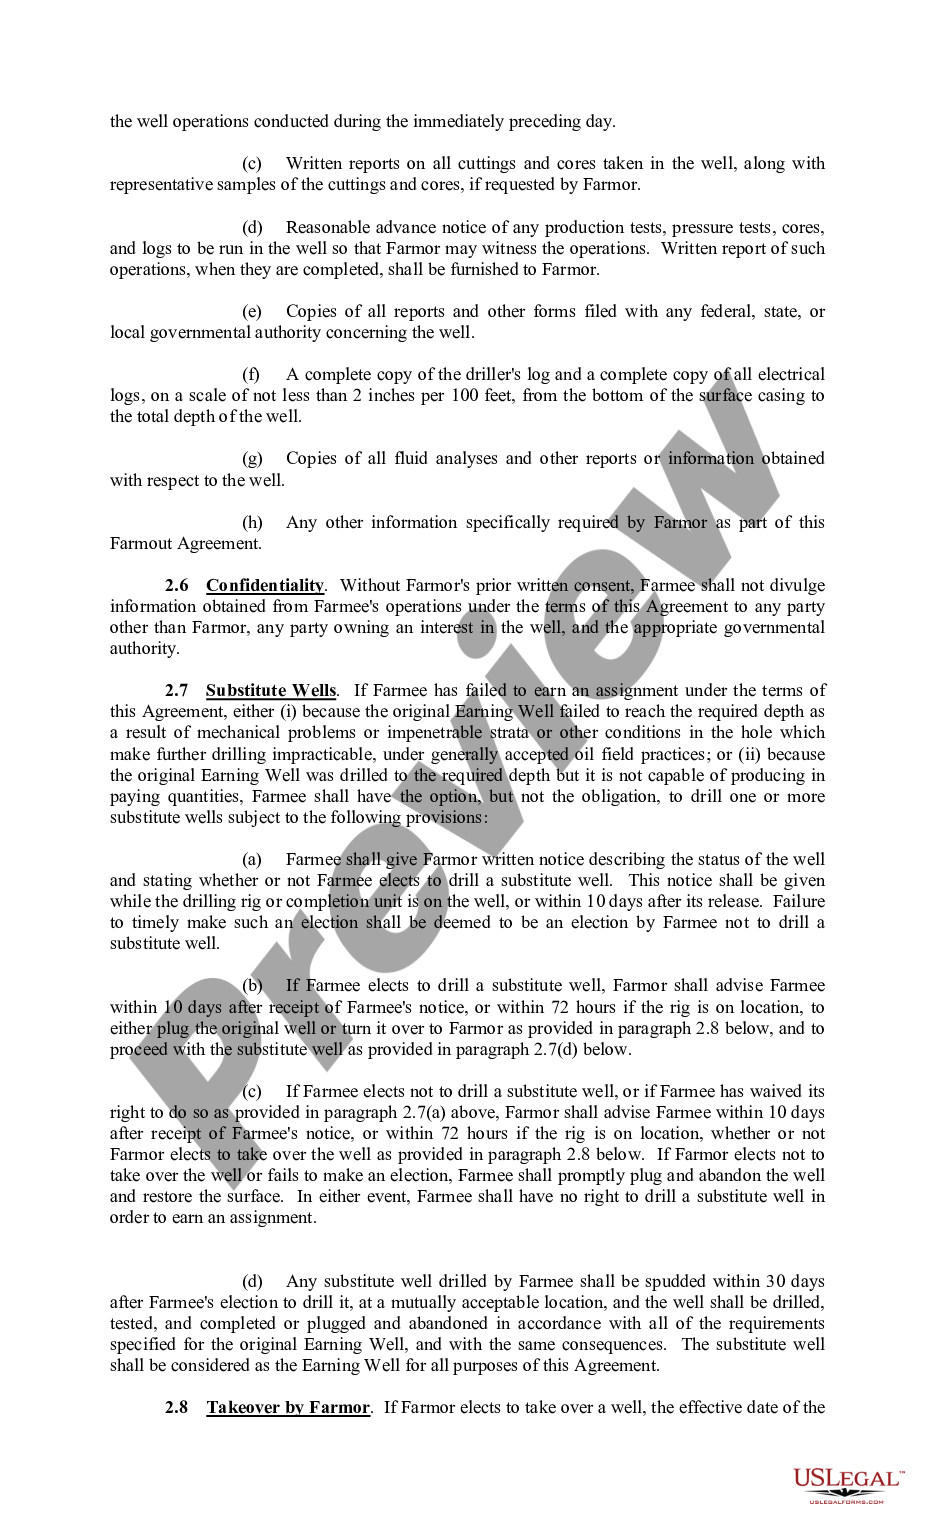 page 7 Farmout Agreement Providing For Multiple Wells with Production Required to Earn An Assignment preview